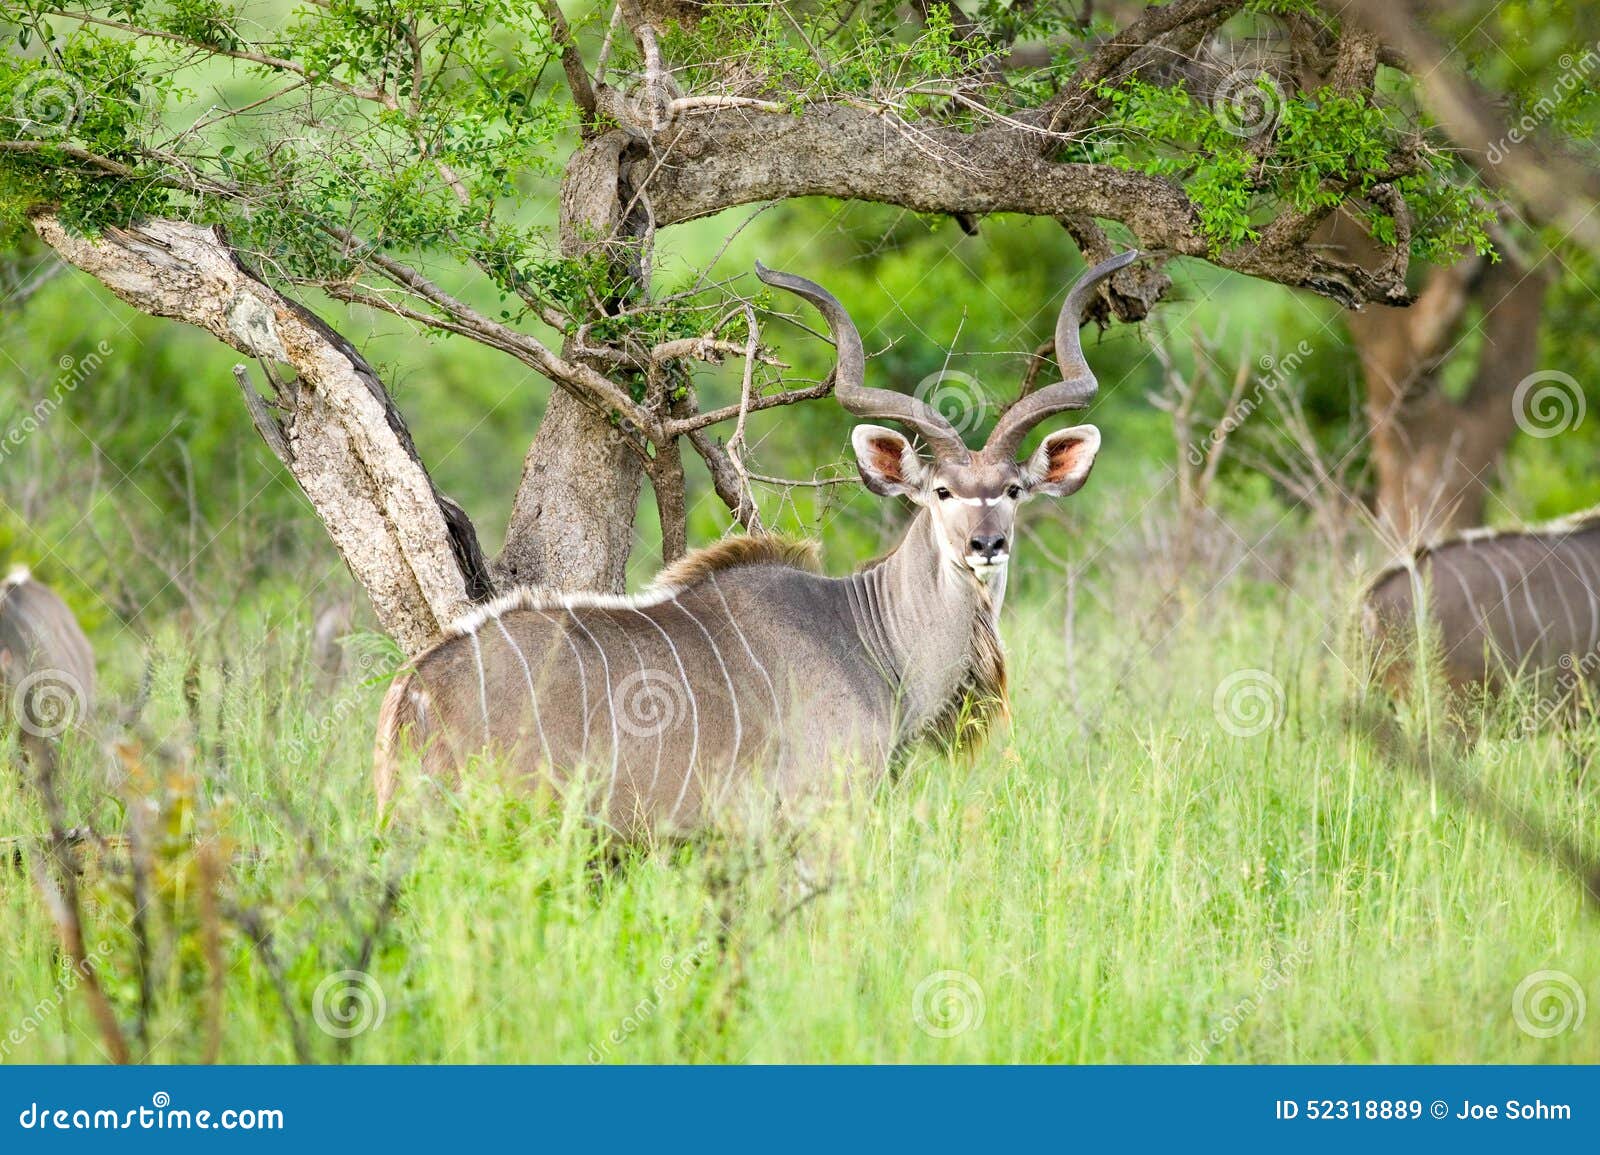 nyala, also called bushbuck in umfolozi game reserve, south africa, established in 1897